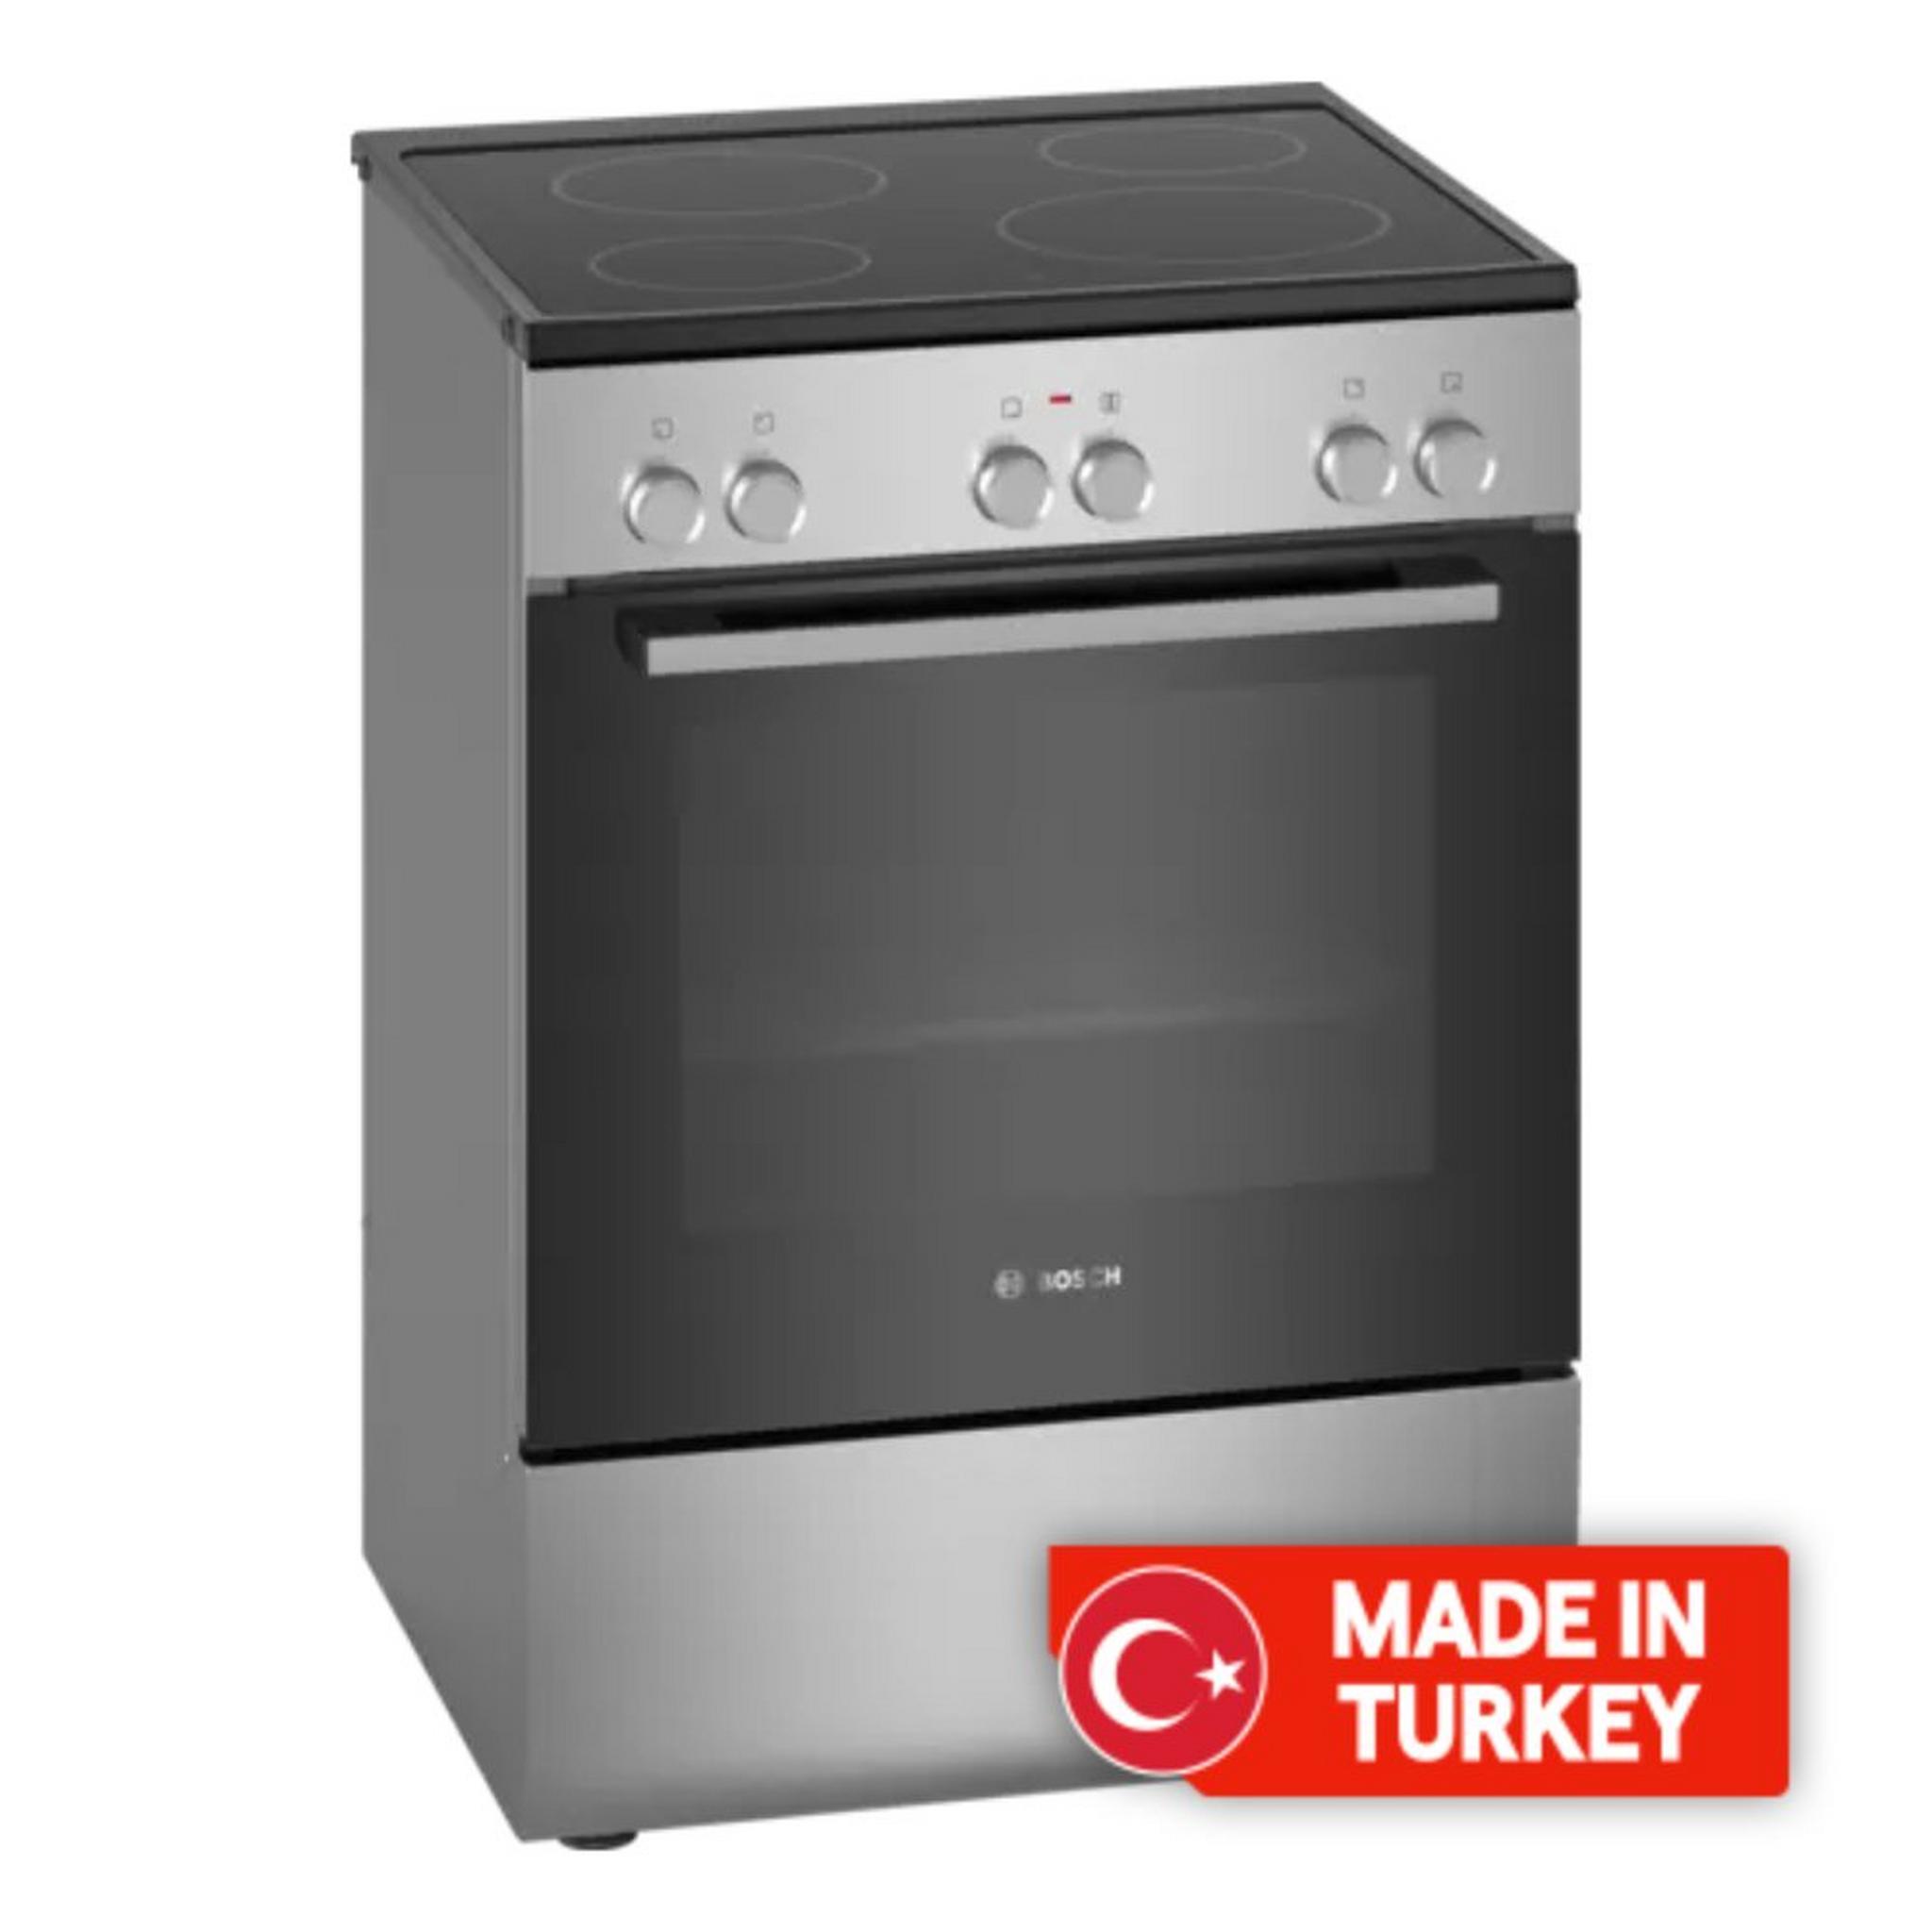 BOSCH Series 2 Electric Cooker, 60X60CM, HKL060070M – Stainless Steel